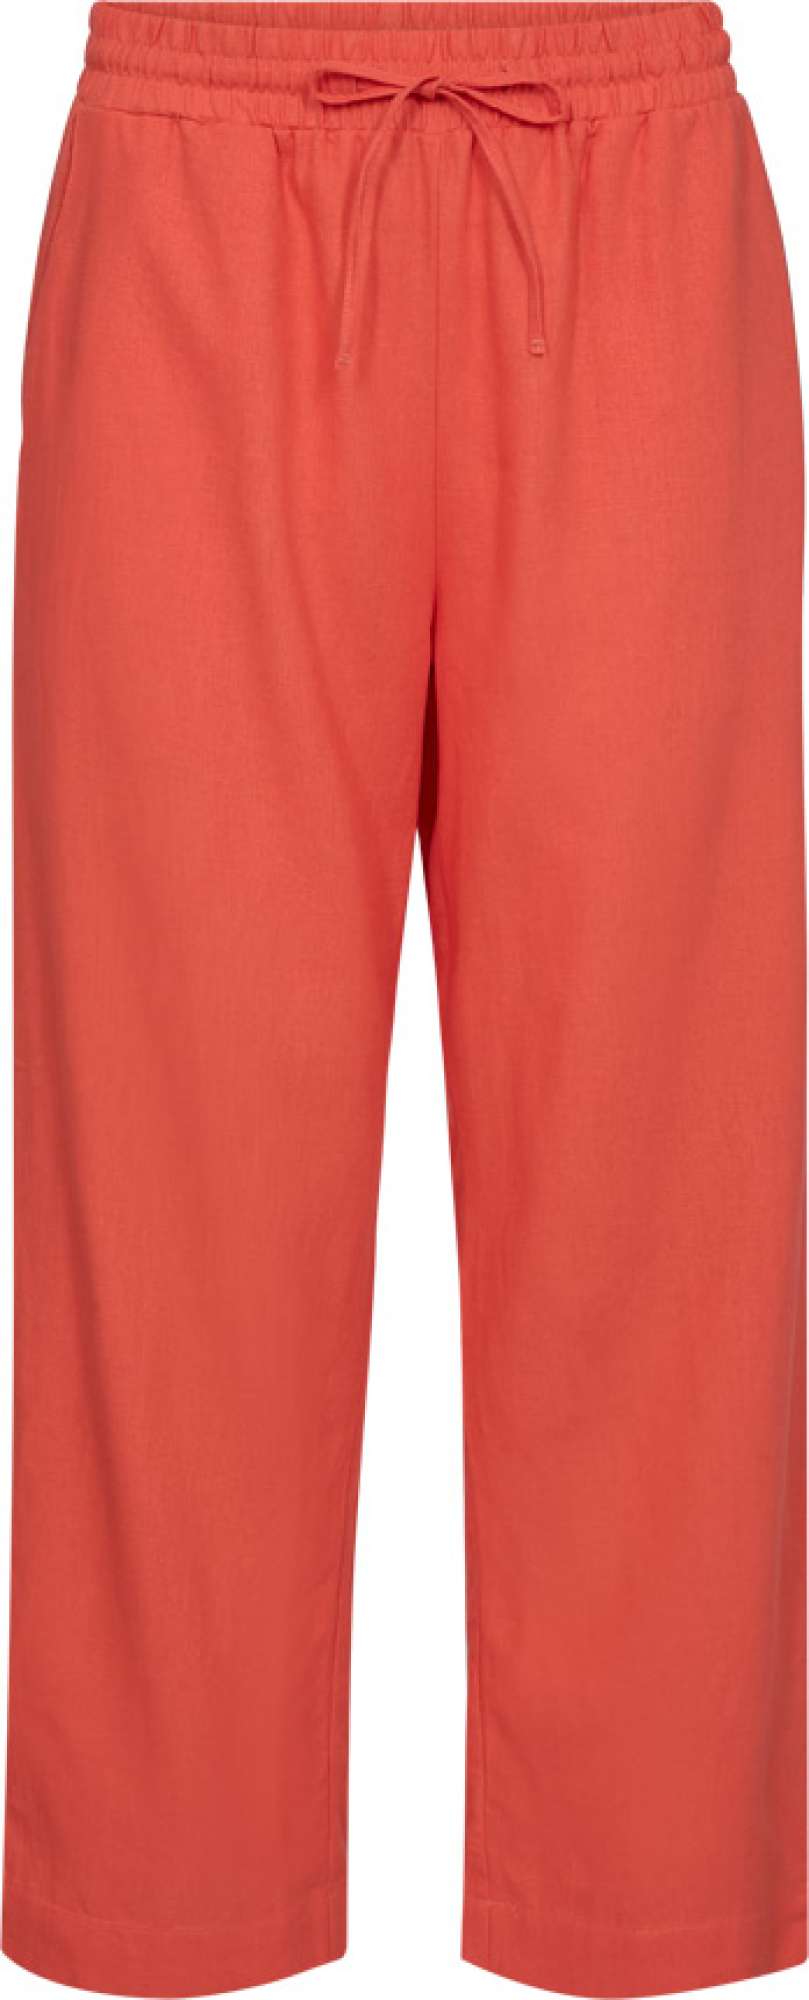 Afbeelding van Free Quent Fqlava ankle pant hot coral